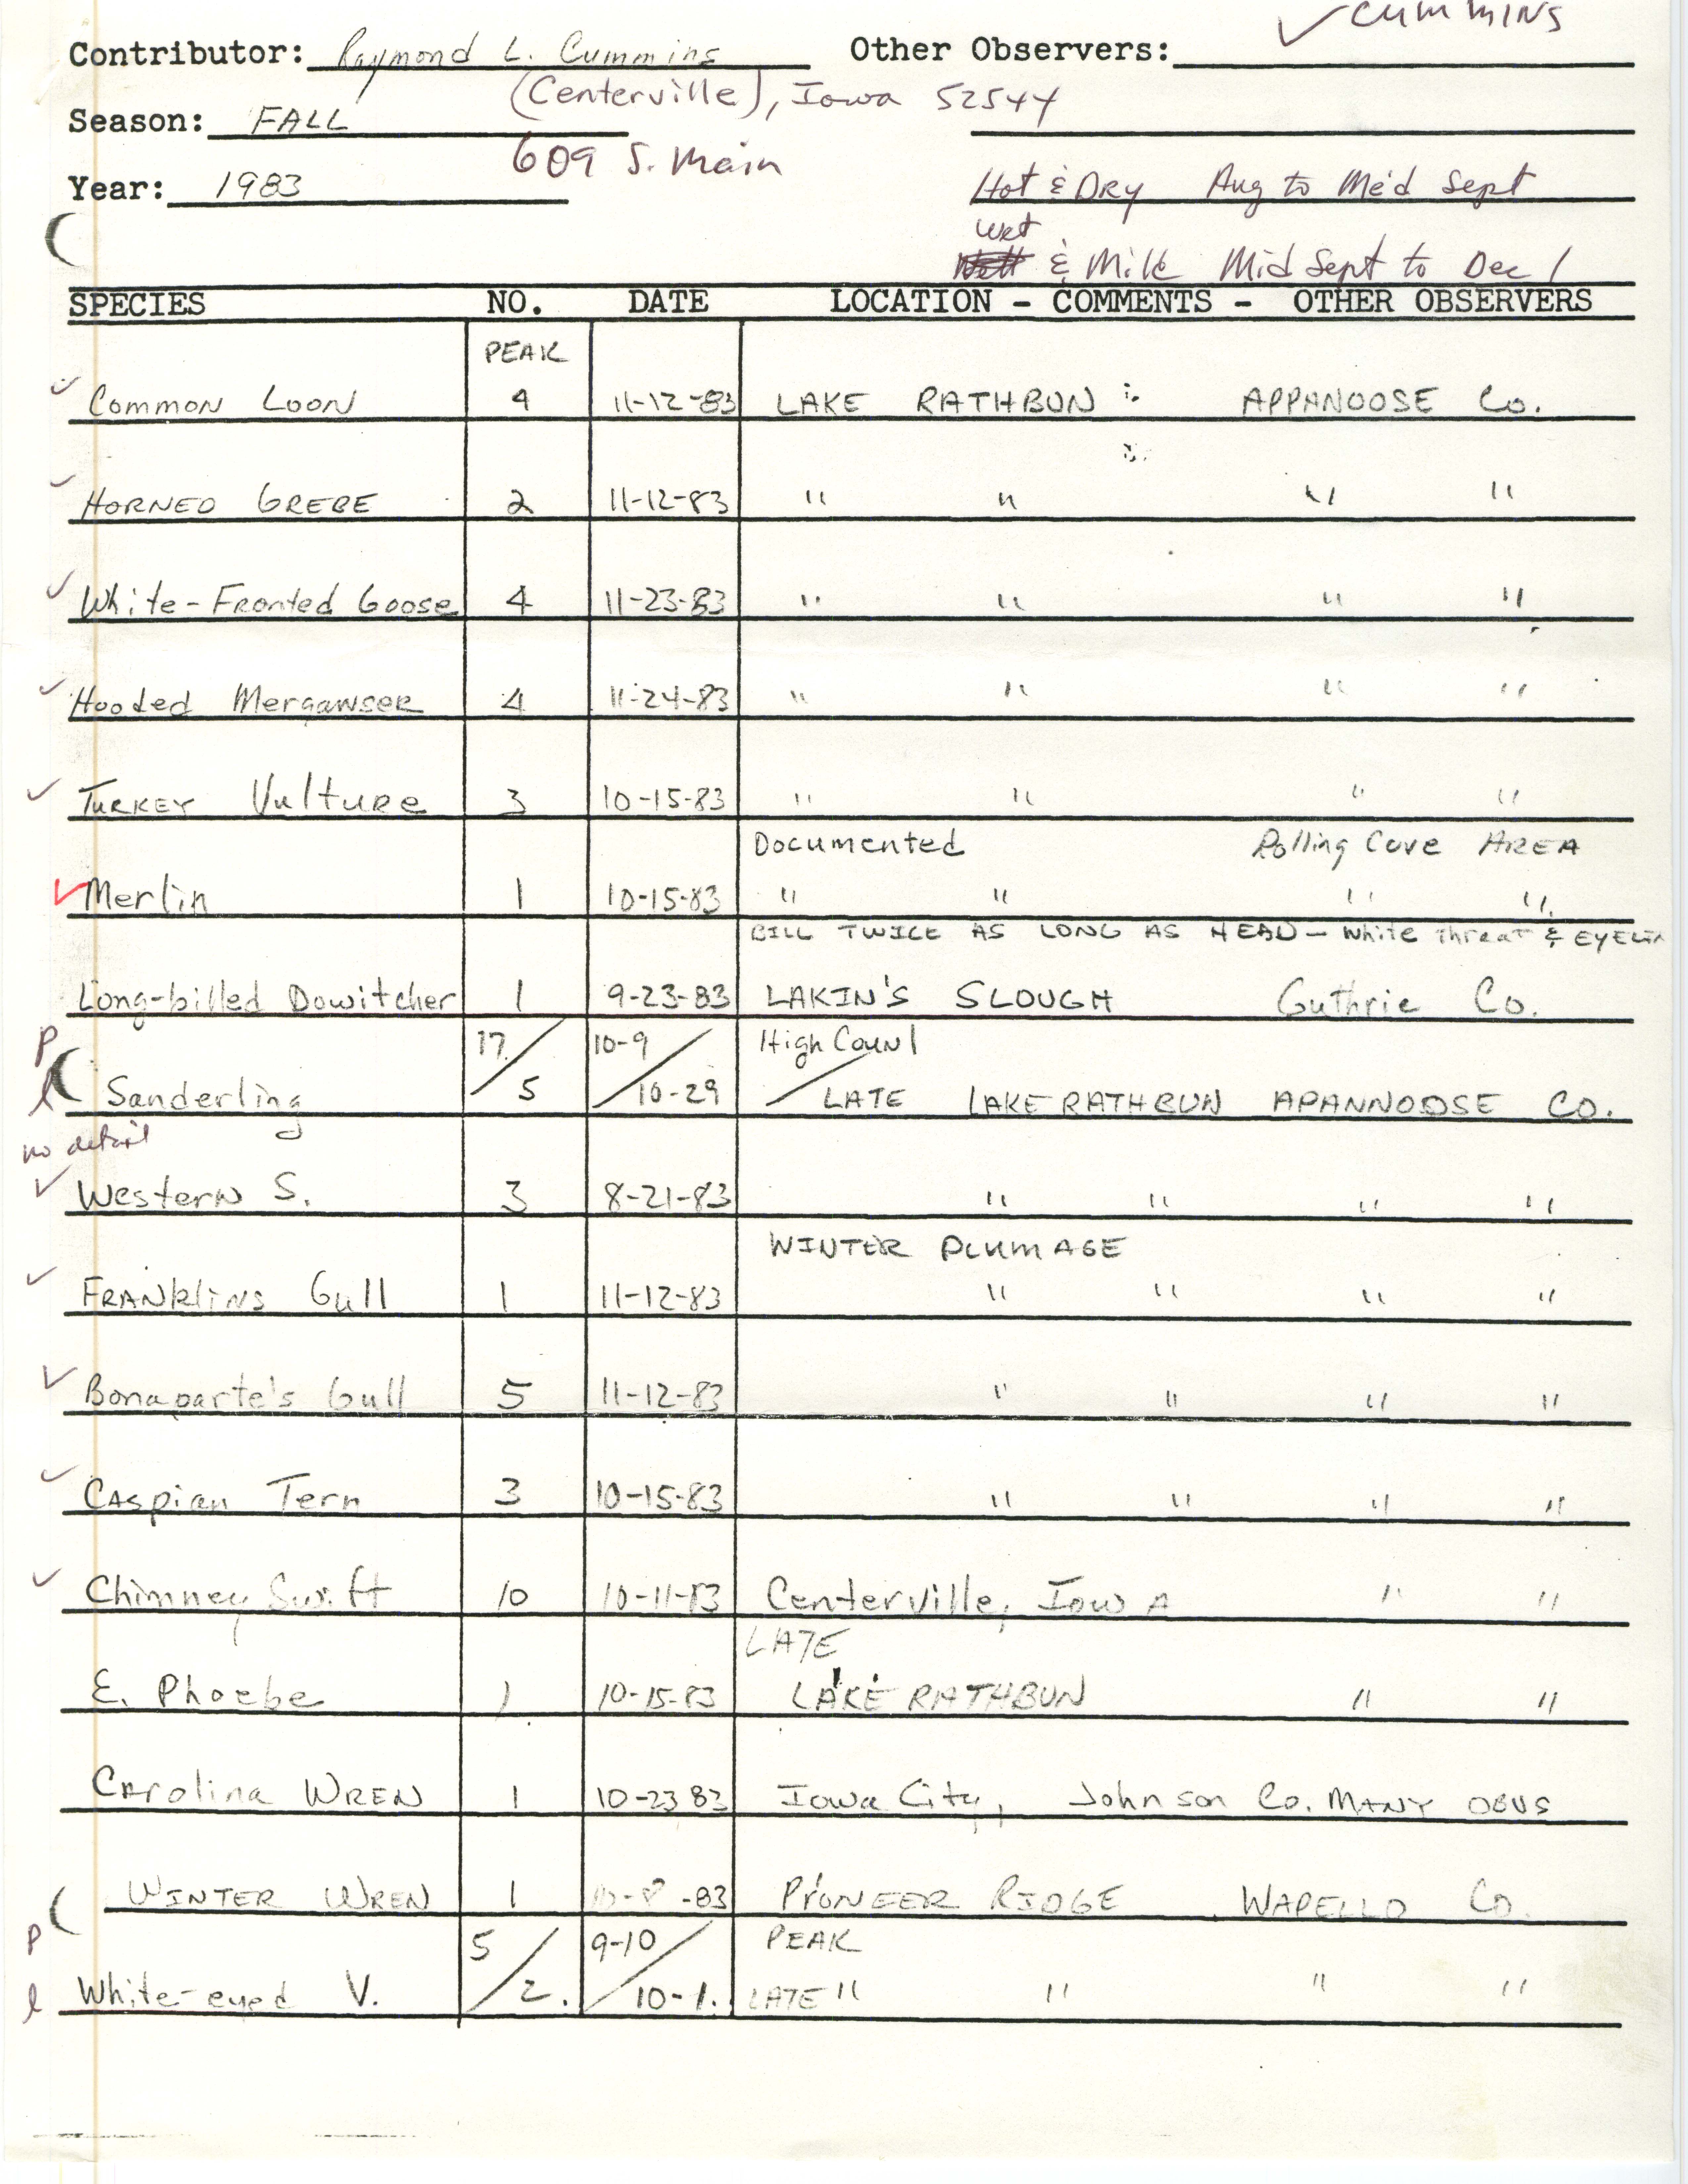 Annotated bird sighting list for fall 1983 compiled by Raymond Cummins